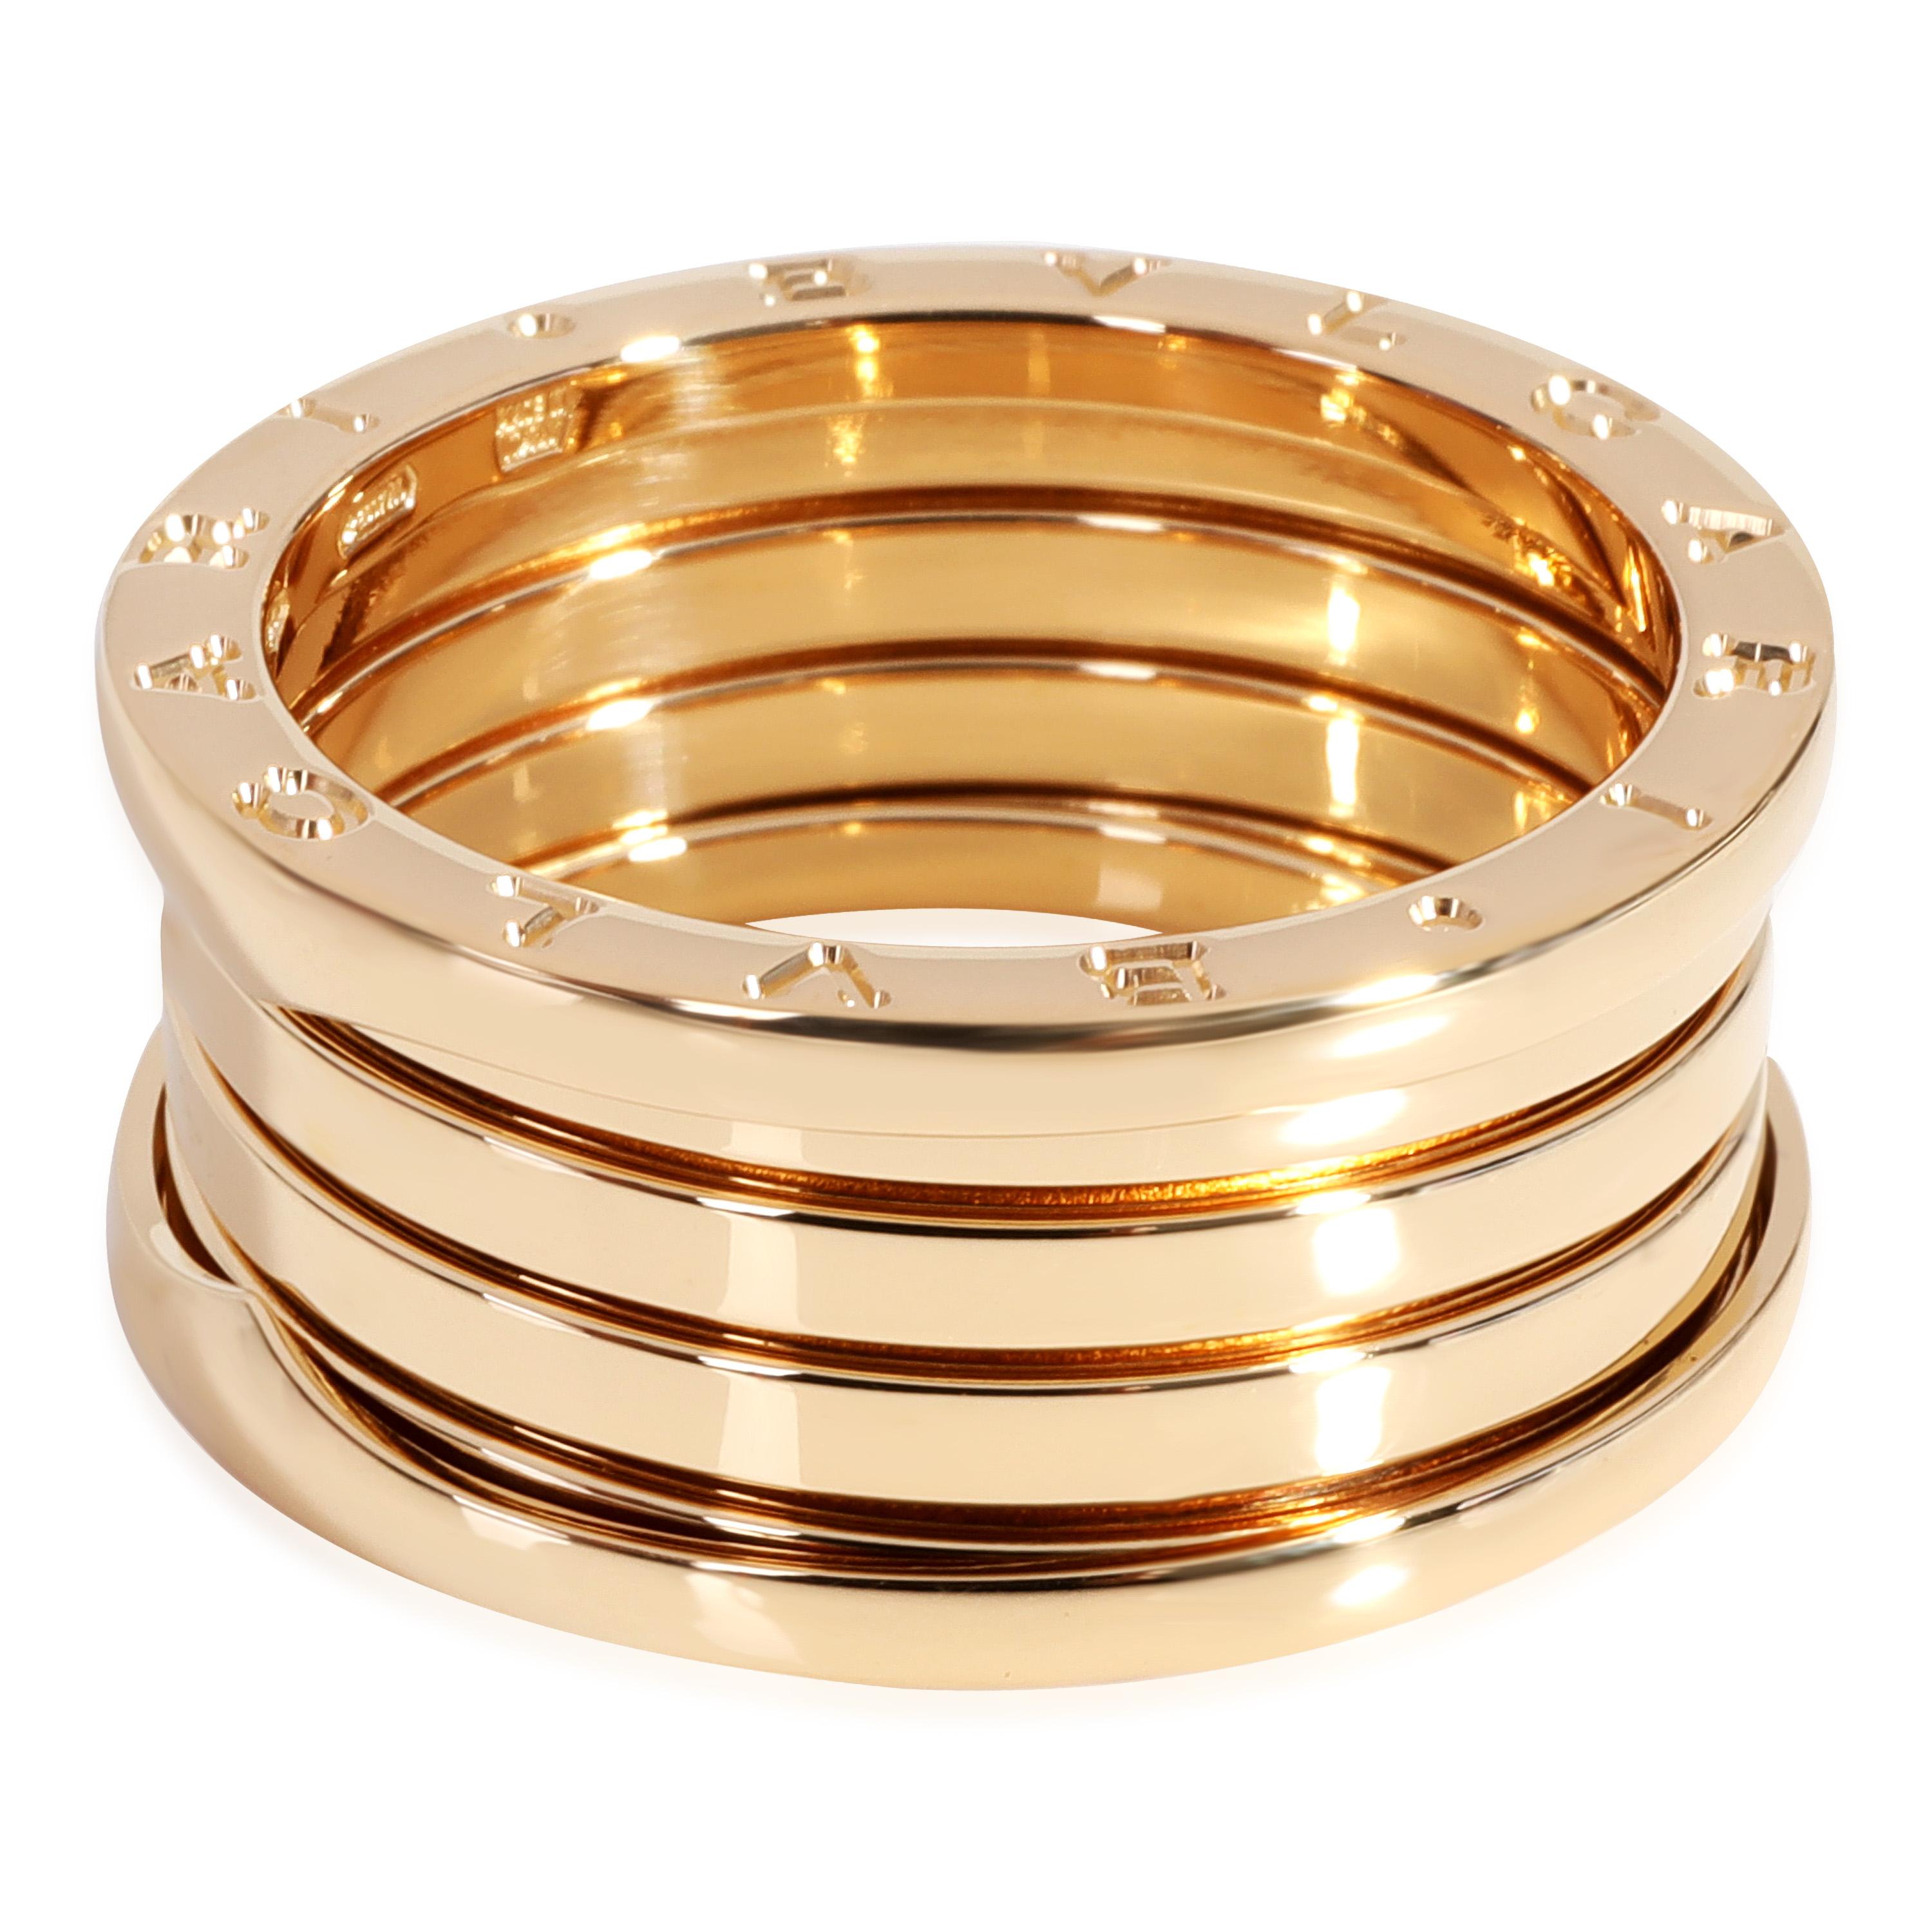 Bulgari B.Zero1 Four Band in 18k Yellow Gold

PRIMARY DETAILS
SKU: 117743
Listing Title: Bulgari B.Zero1 Four Band in 18k Yellow Gold
Condition Description: Retails for 2650 USD. In excellent condition and recently polished. Ring size is